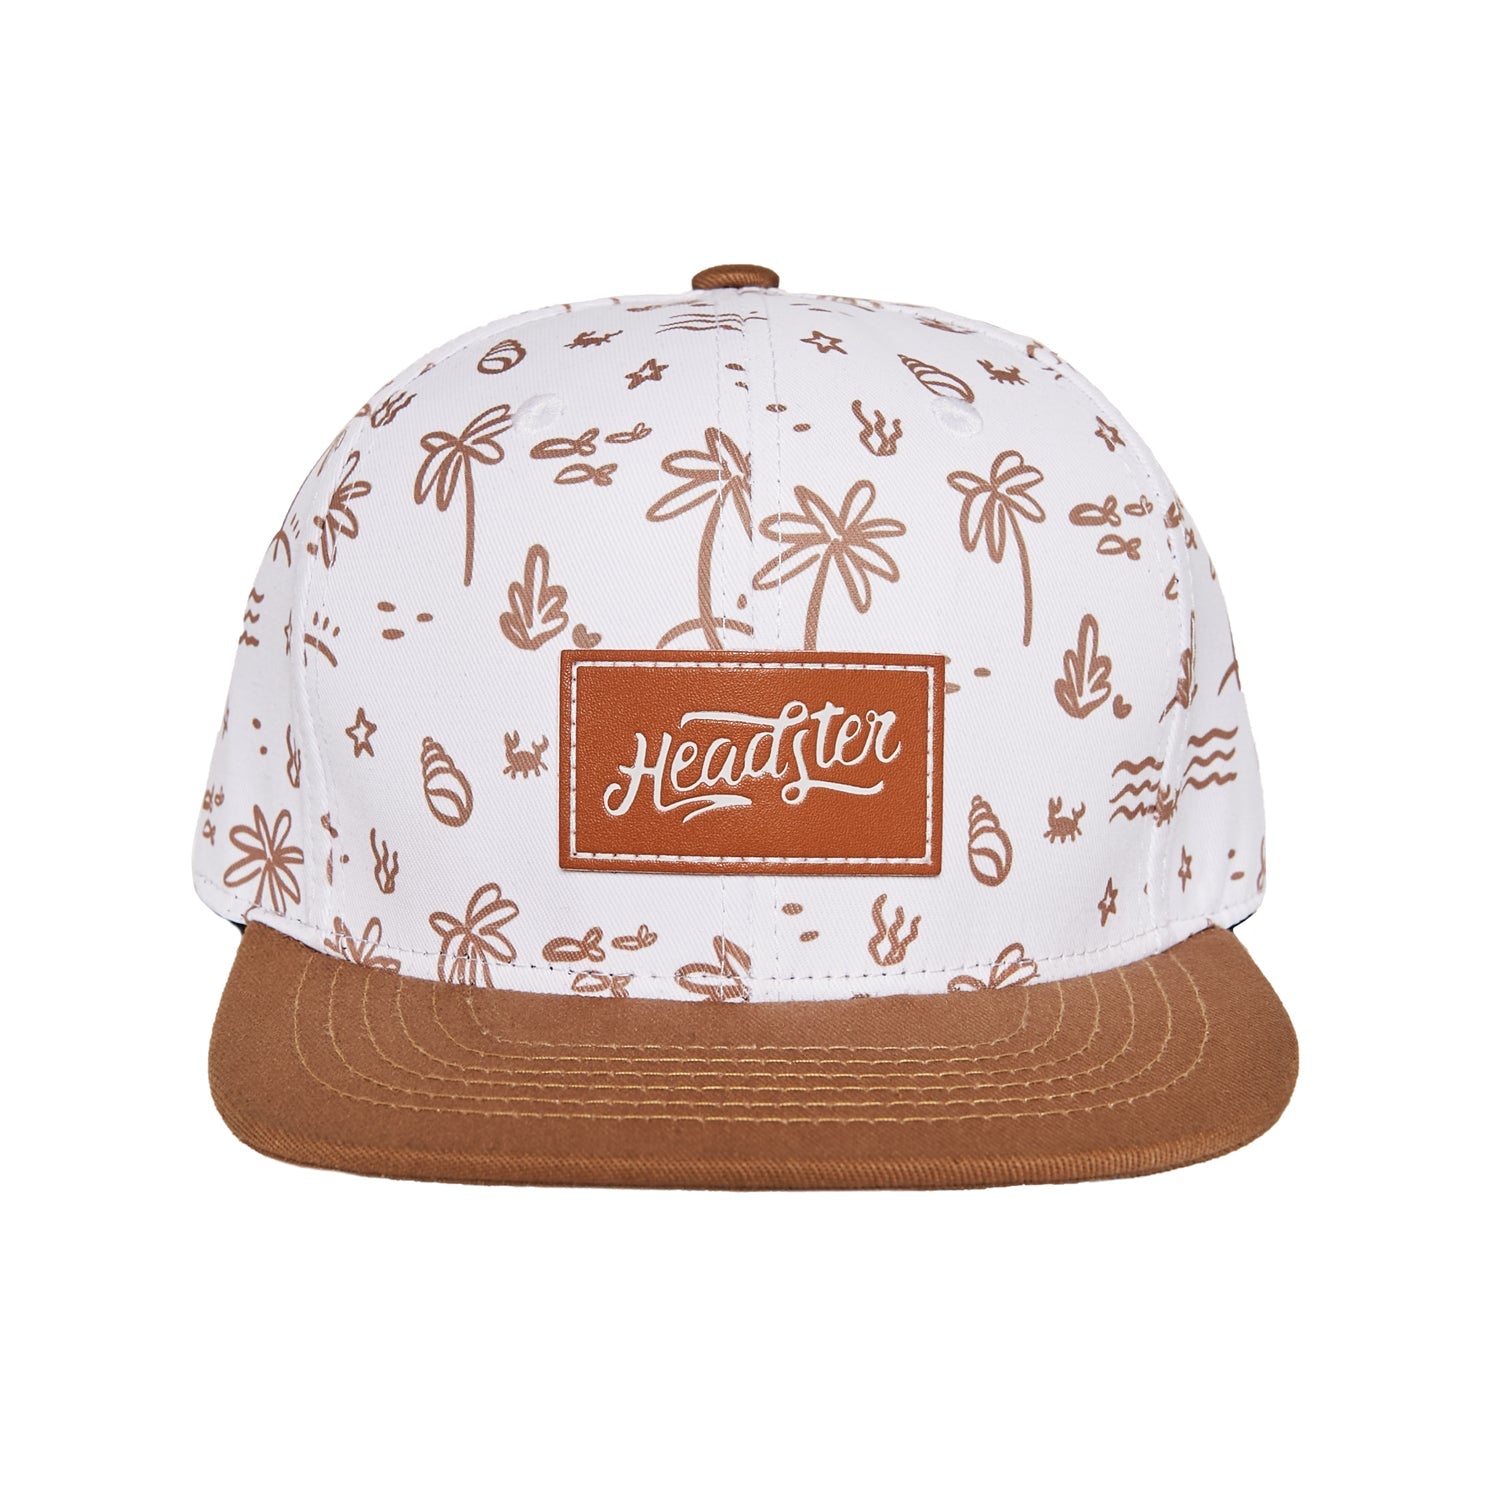 Headster Kids Vacay hat against white backdrop 